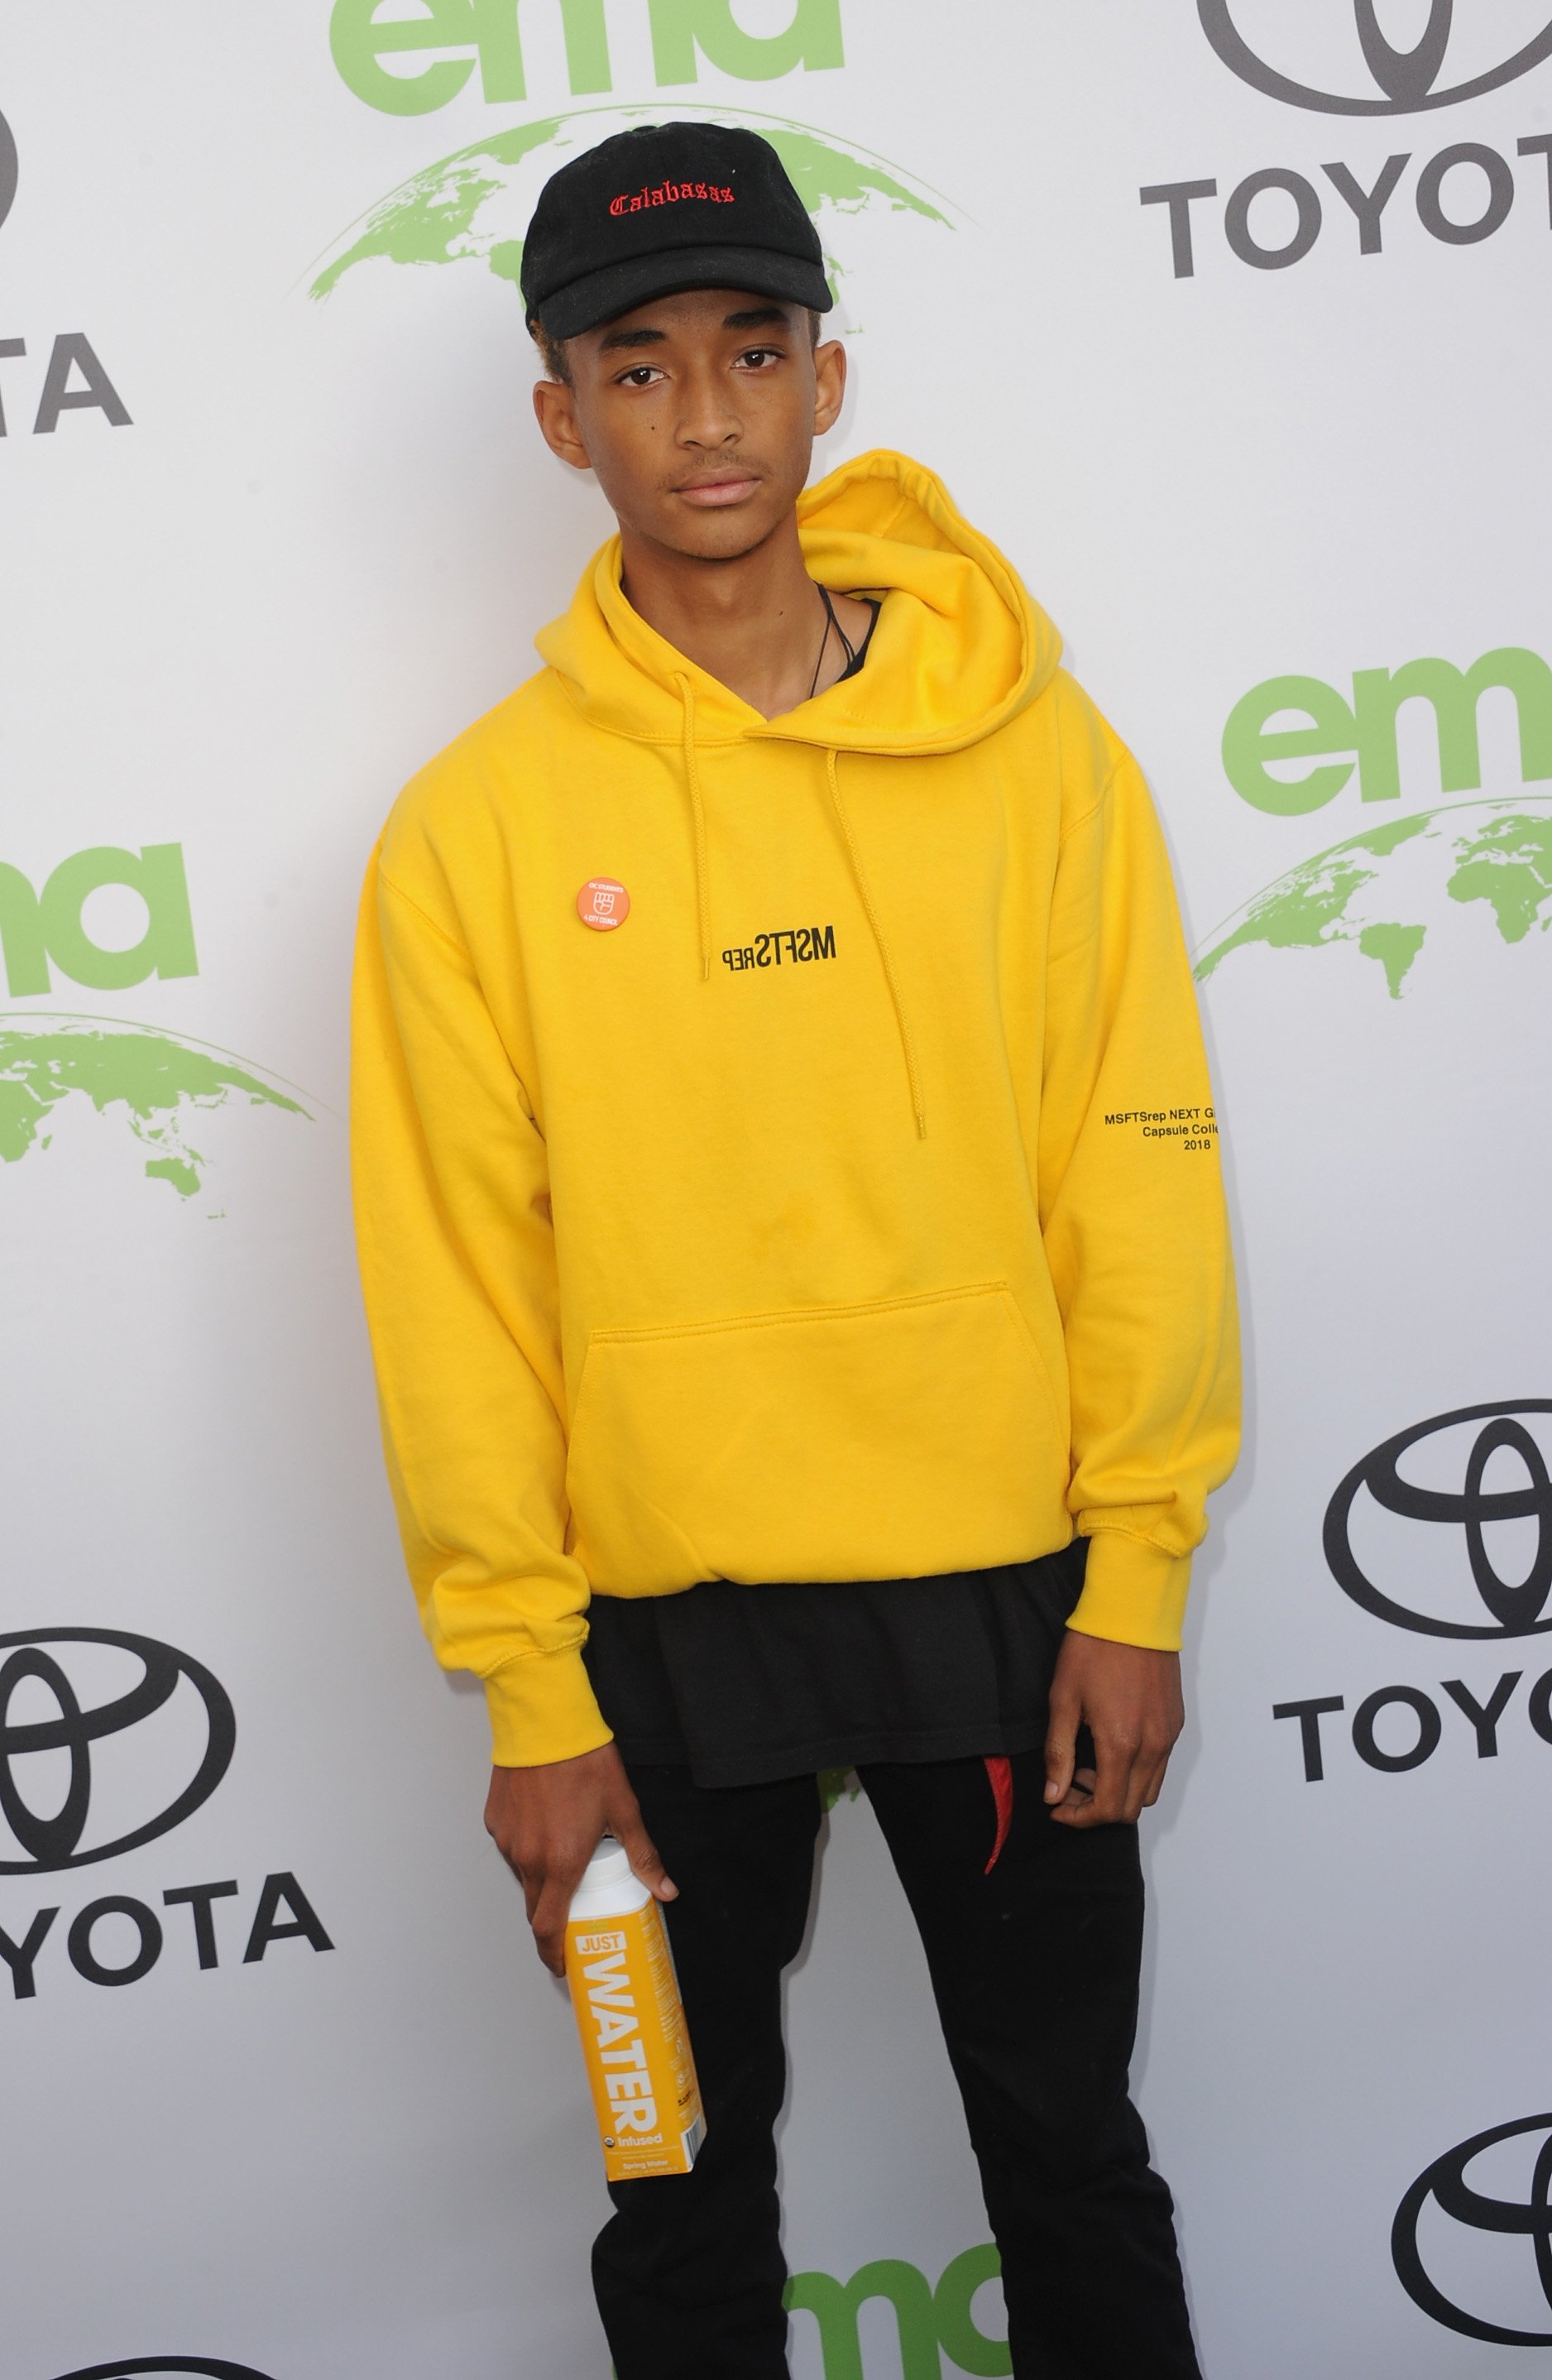 Jaden Smith at the 28th Annual EMA Awards in California on May 22, 2018 | Photo: Getty Images